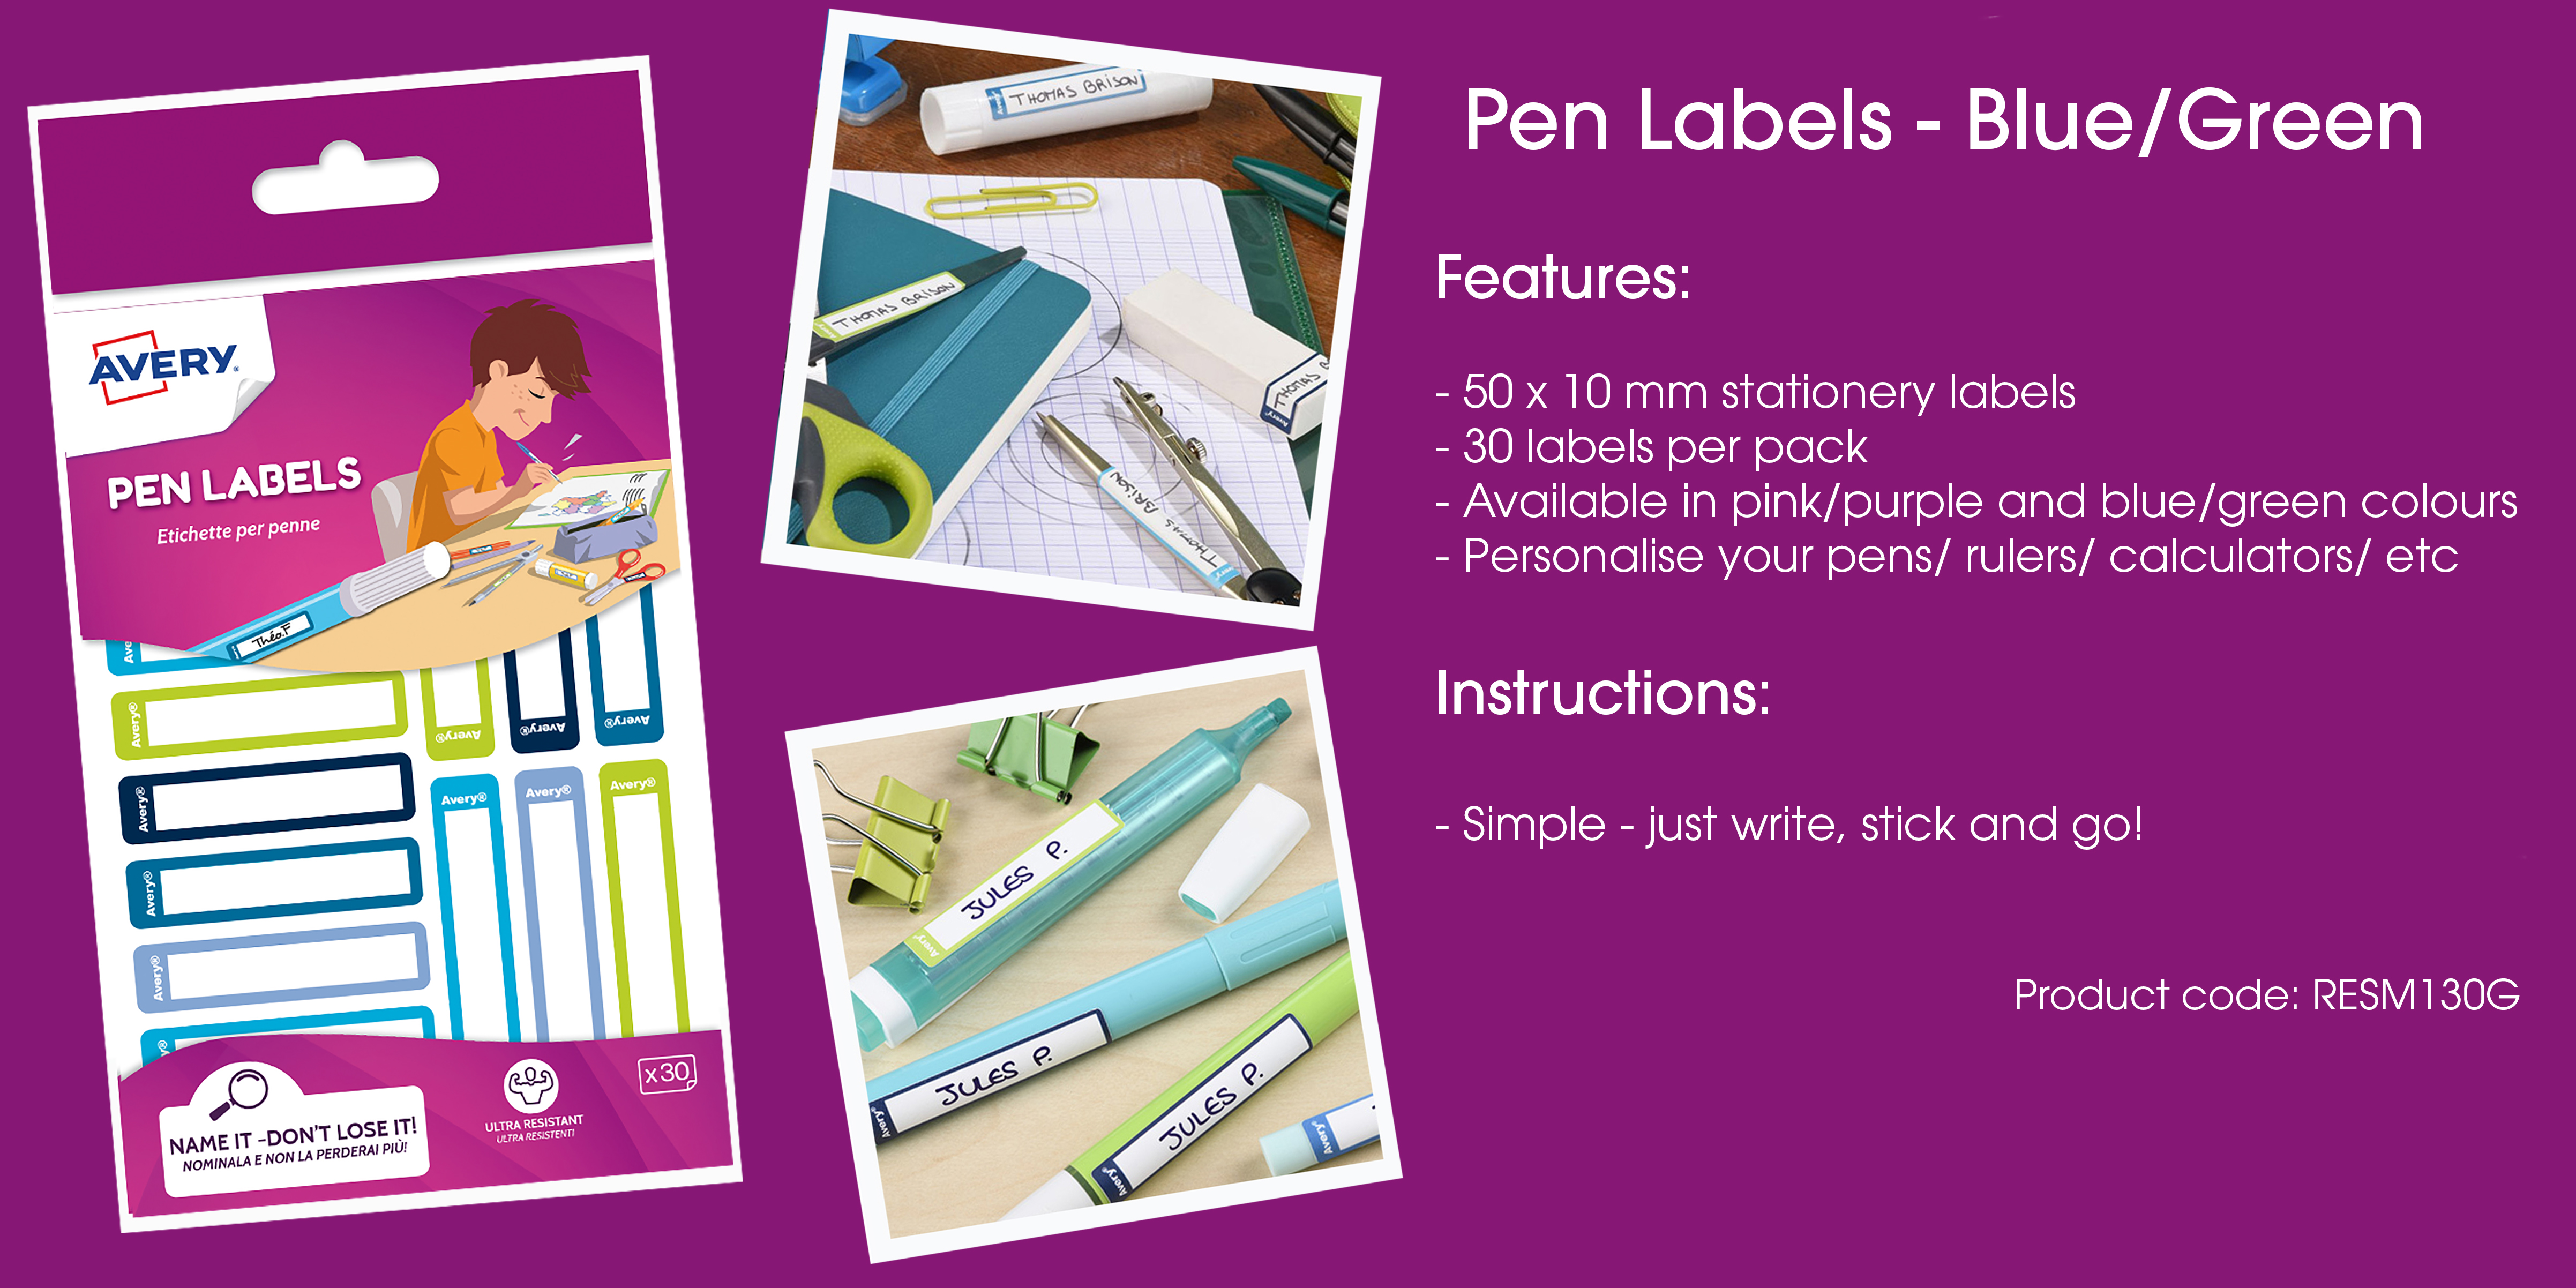 Avery Stationery & Pen Labels - Blue/Green